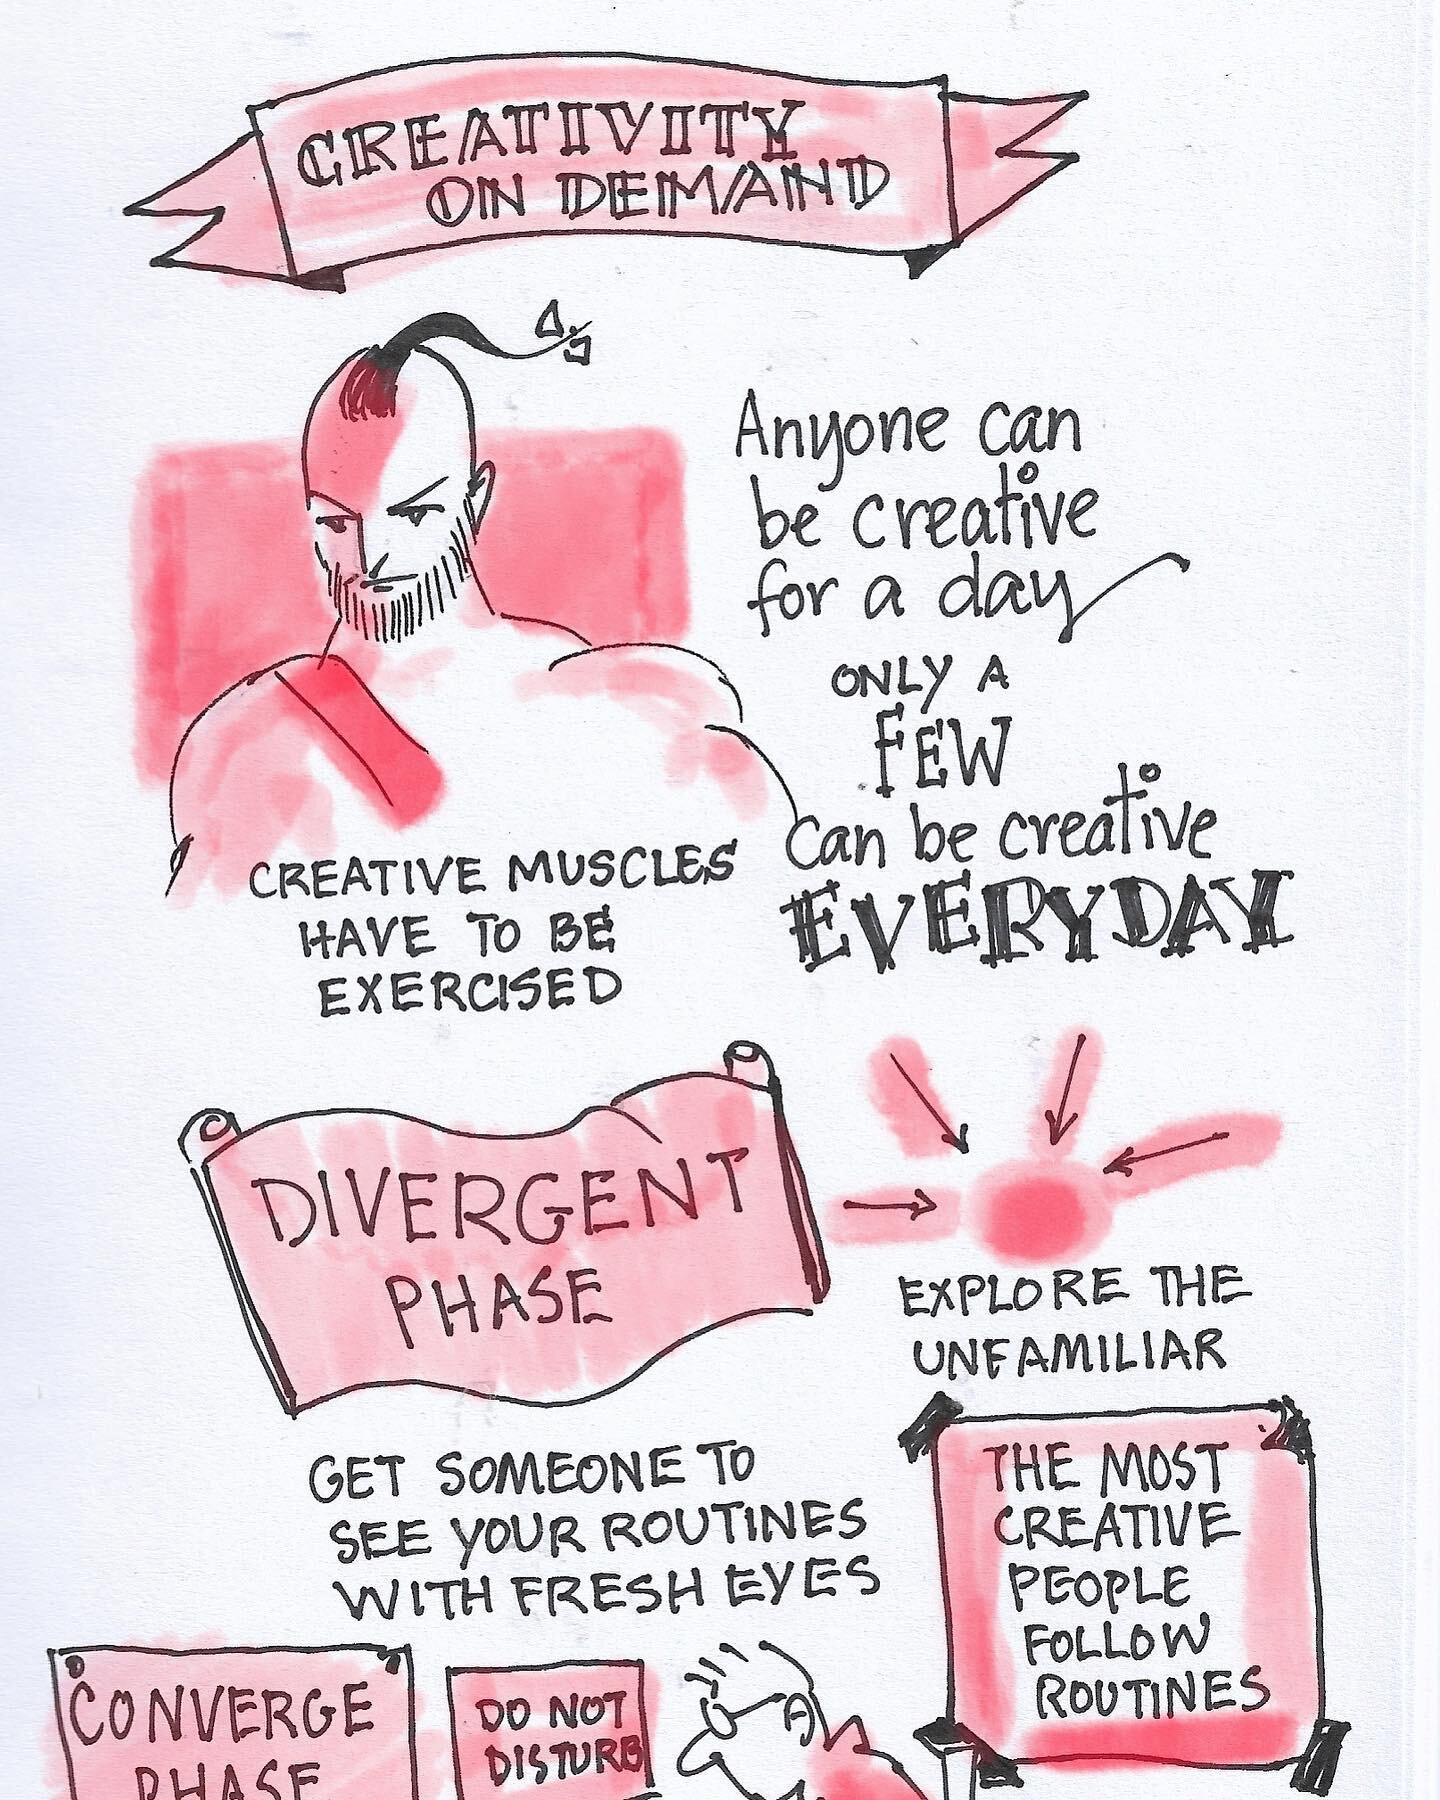 Creative people follow &ldquo;extreme routines&rdquo; Link in the comments.